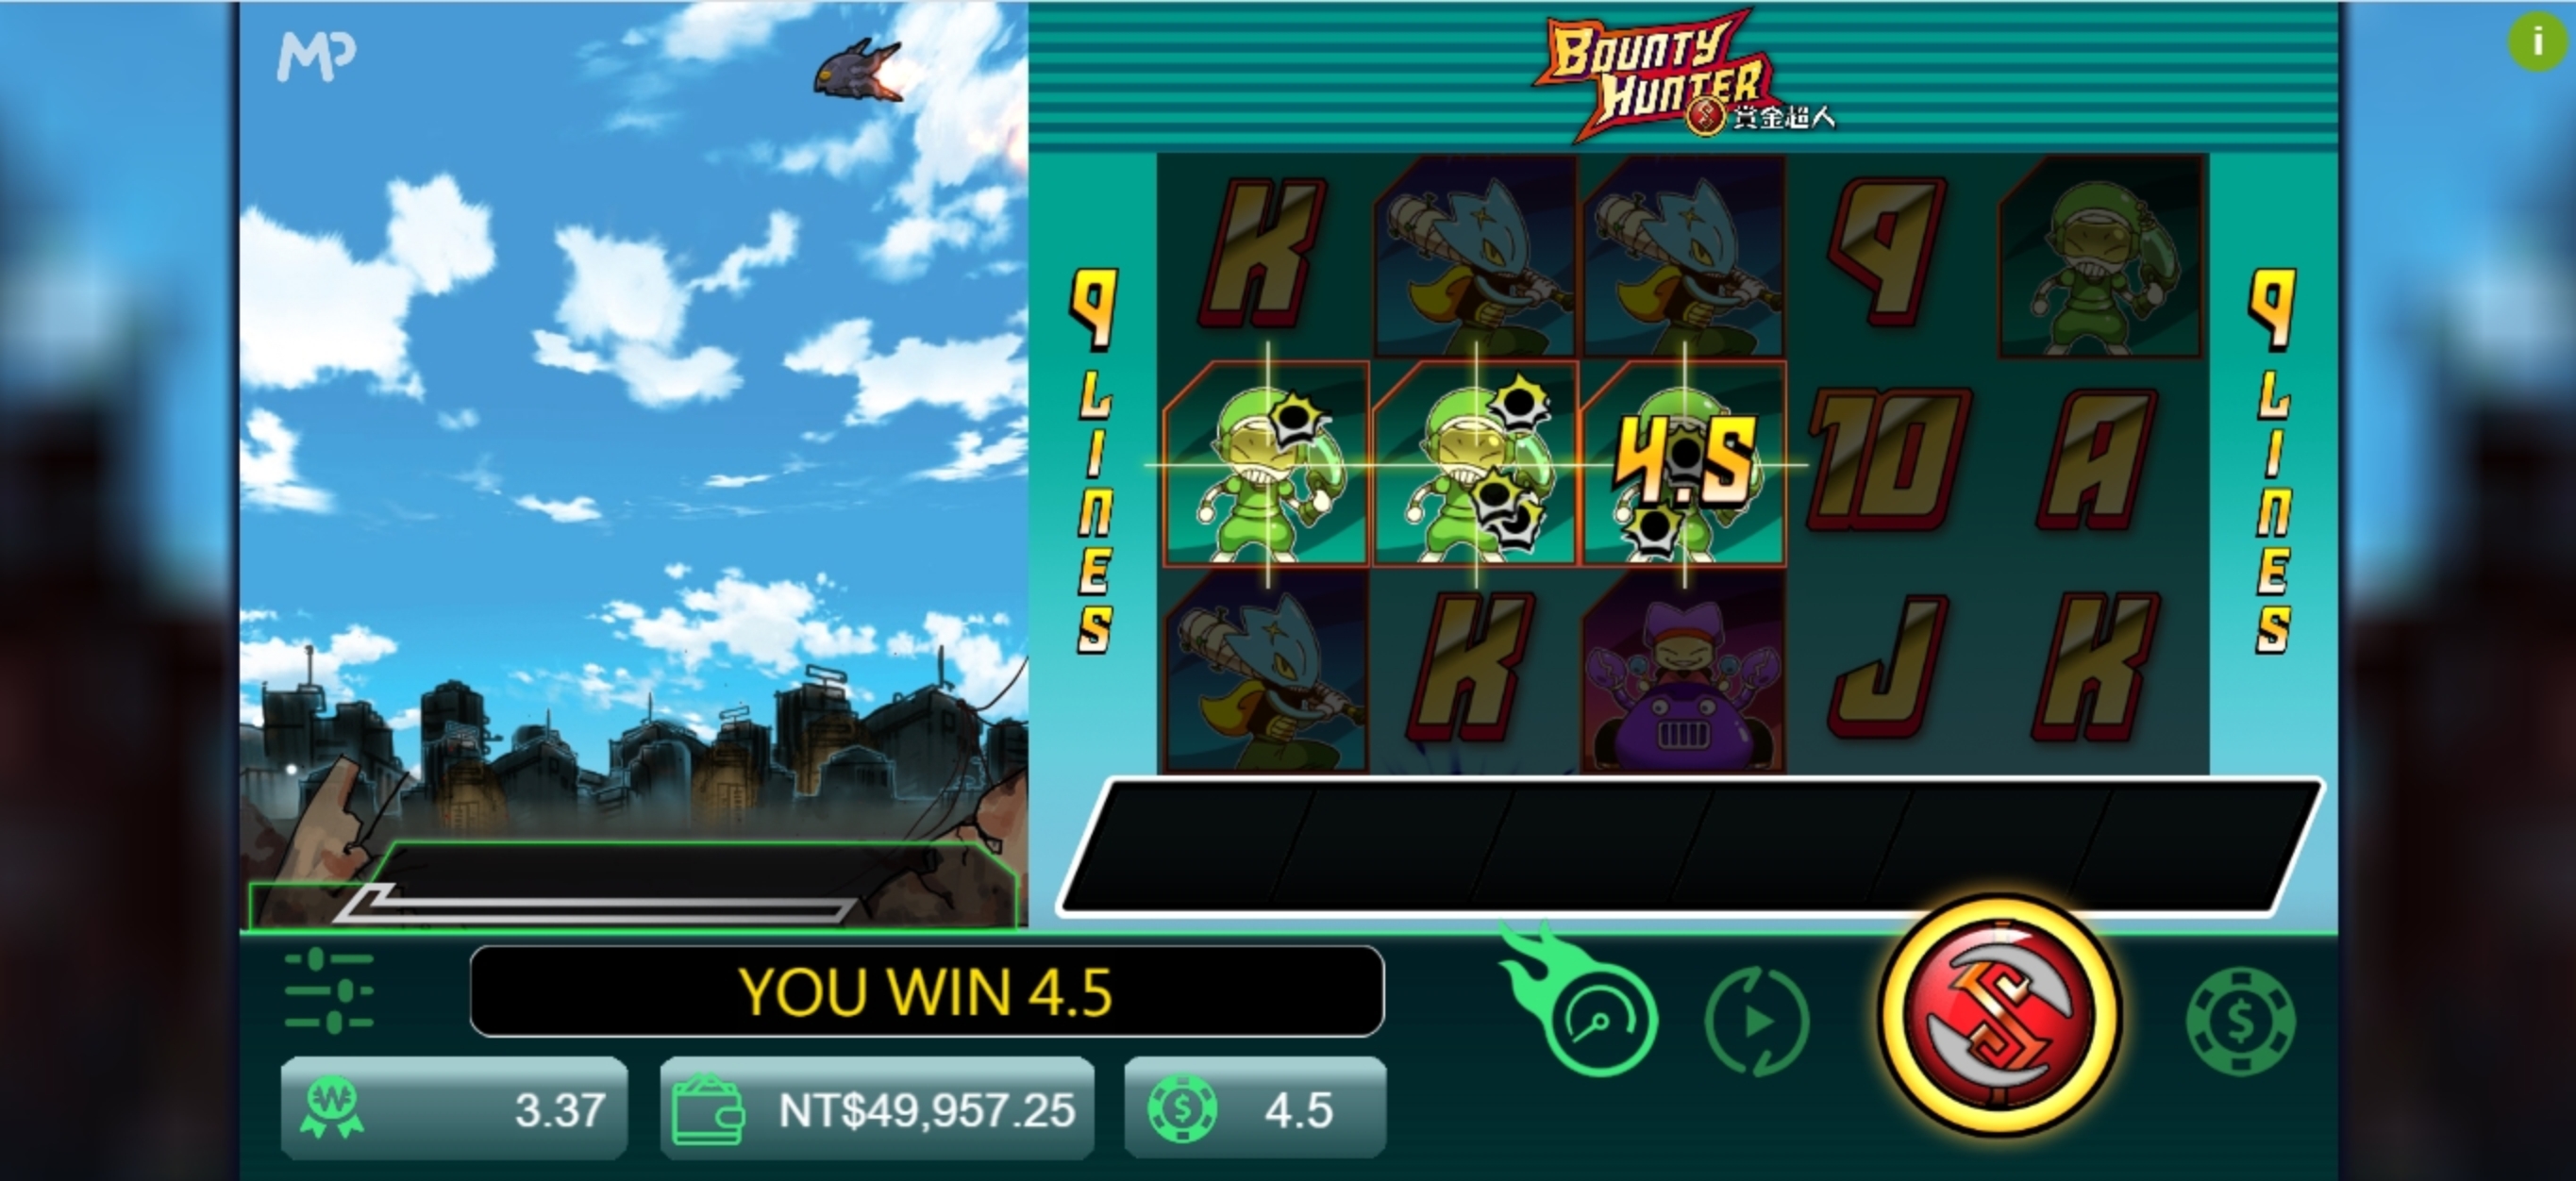 Win Money in Bounty Hunter Free Slot Game by Manna Play